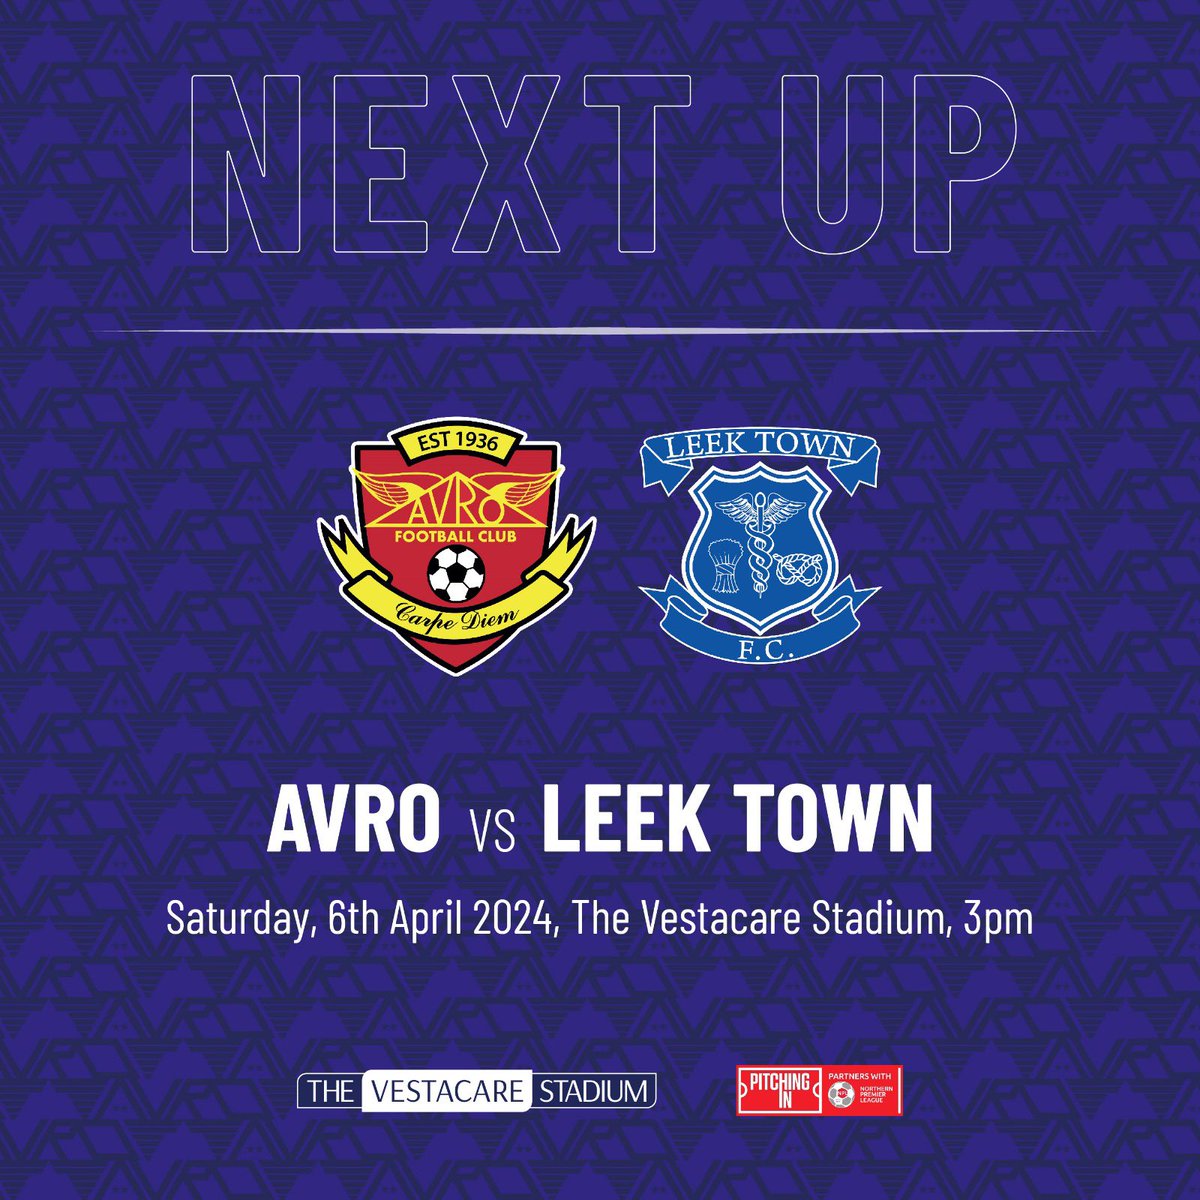 Great offer from @AvroFC and @avrosportsbar tomorrow. 2 free pints for all @OfficialOAFC and @officiallydale fans who can show their derby ticket at the turnstile. #avrofc #oafc #rafc double header 12.30ko at boundary park. 3pm @VestacareStadia ⚽️⚽️⚽️⚽️⚽️